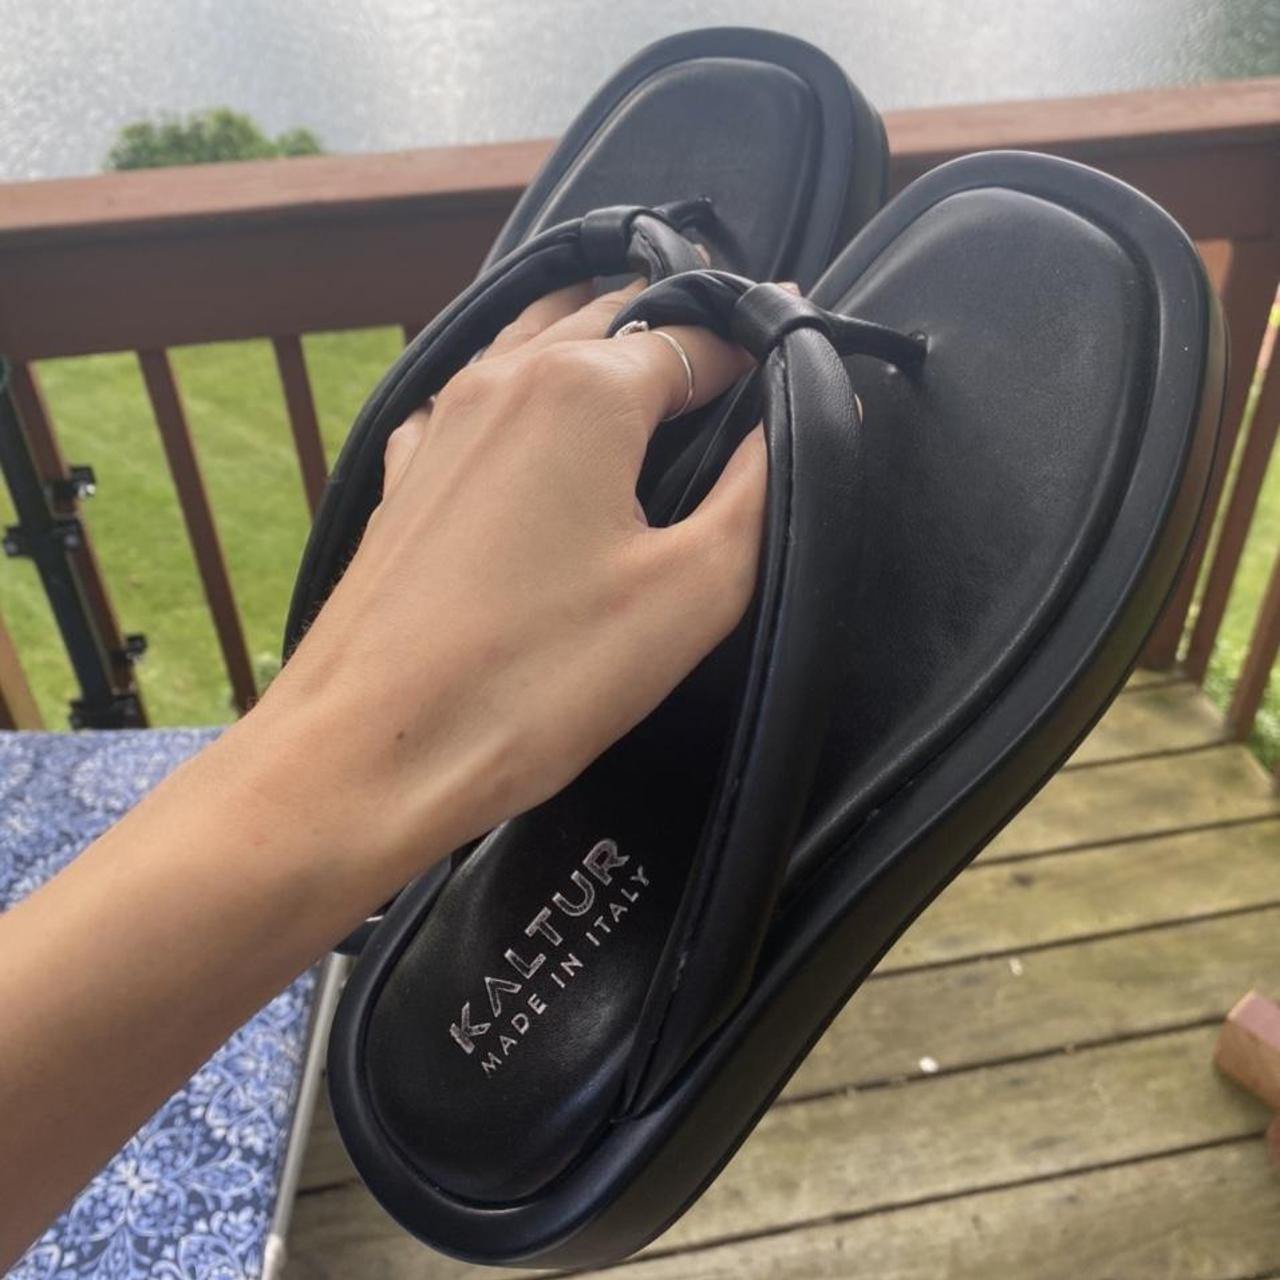 Product Image 1 - Chunky leather flip flops by